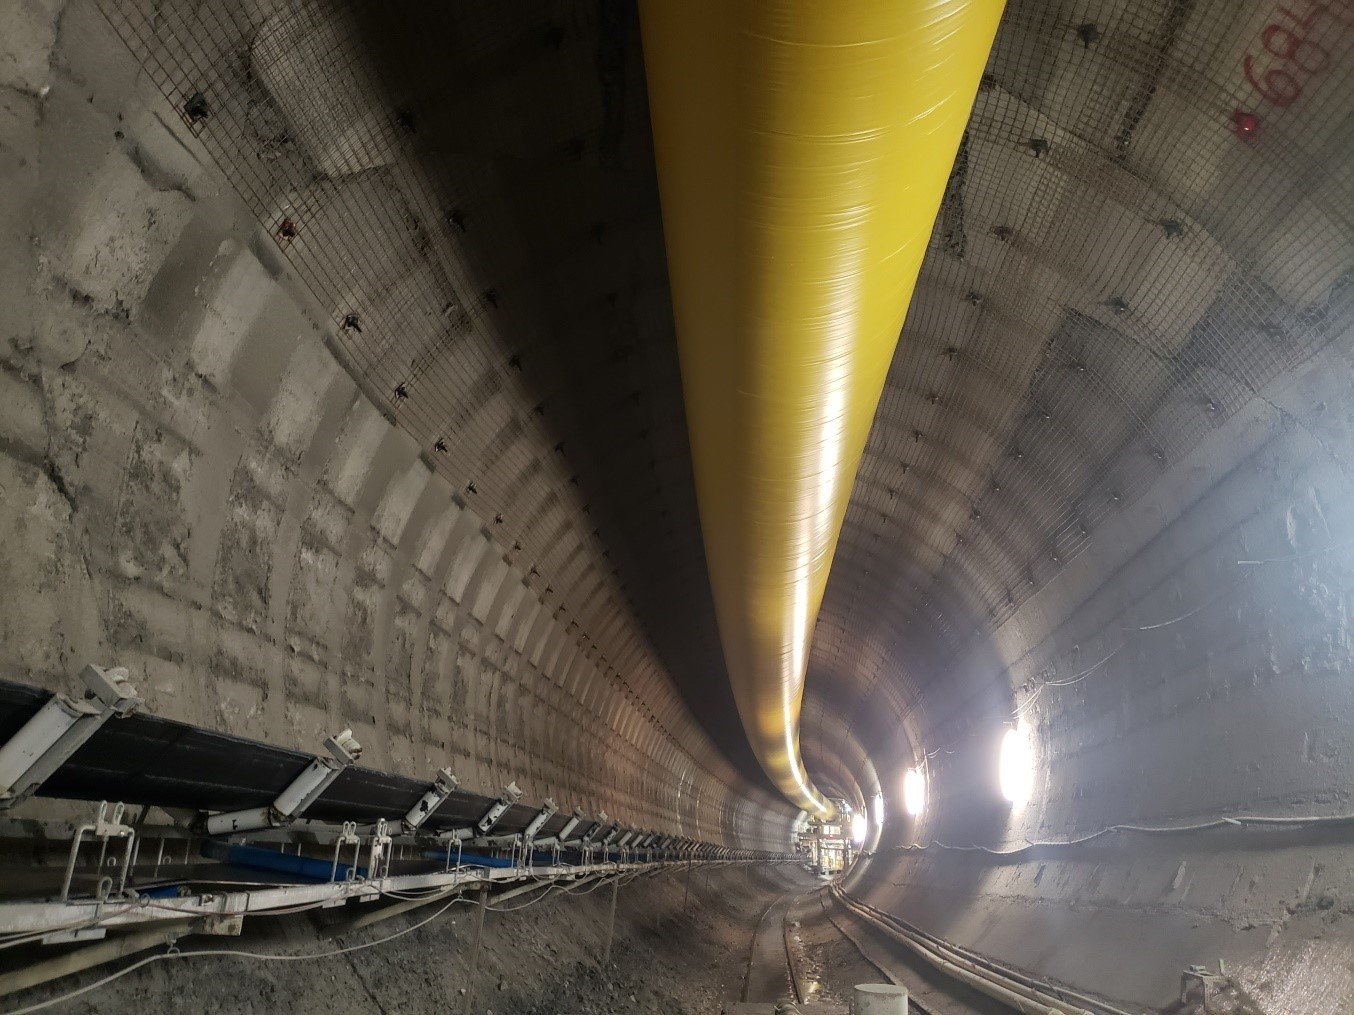 July 2021 - 32.58-ft Diamater Tunnel